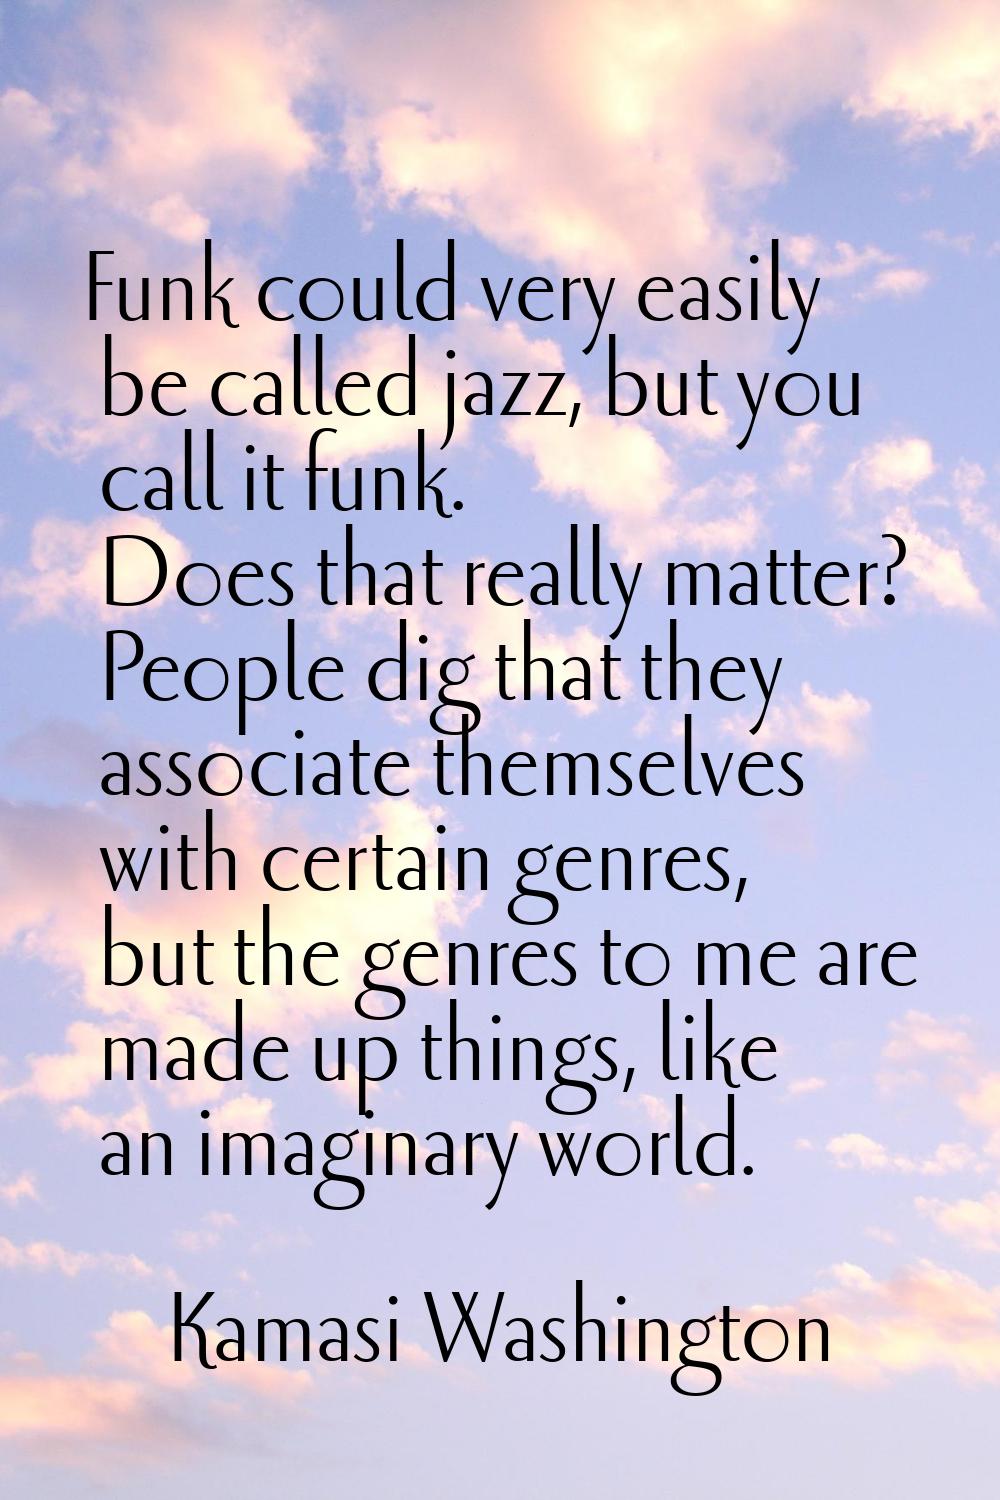 Funk could very easily be called jazz, but you call it funk. Does that really matter? People dig th